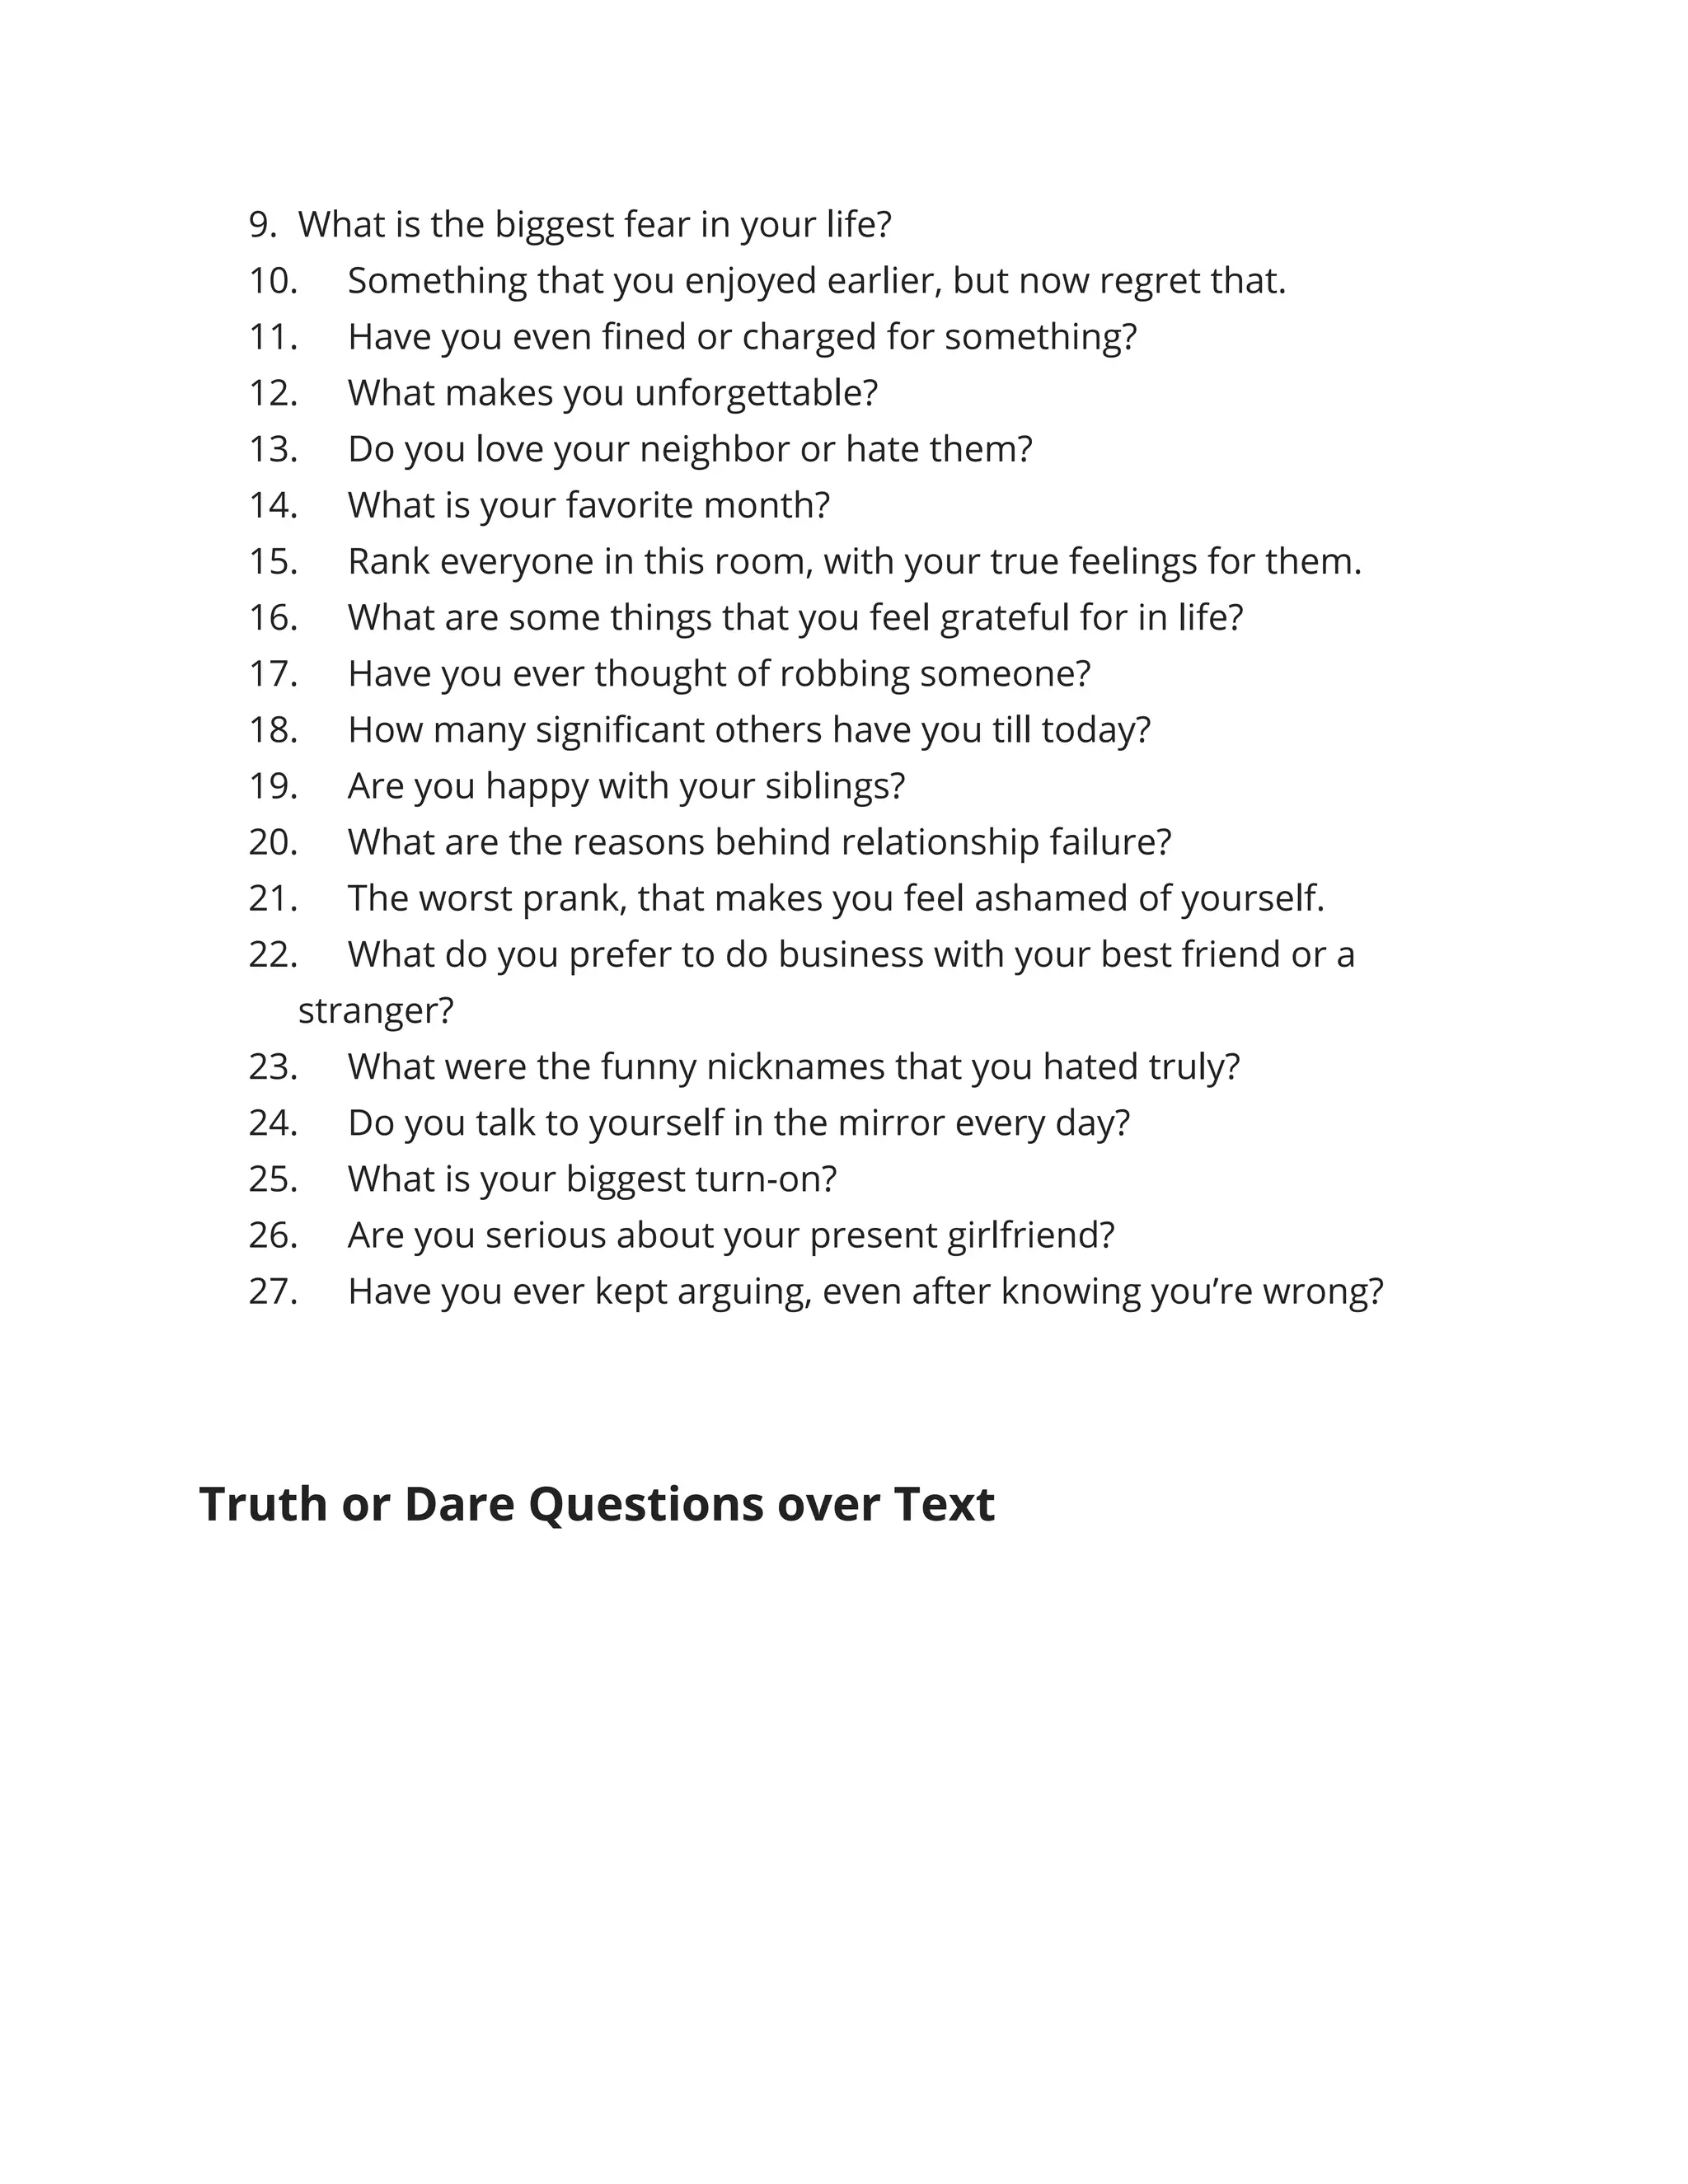 Truth or dare questions to ask a guy or a girl